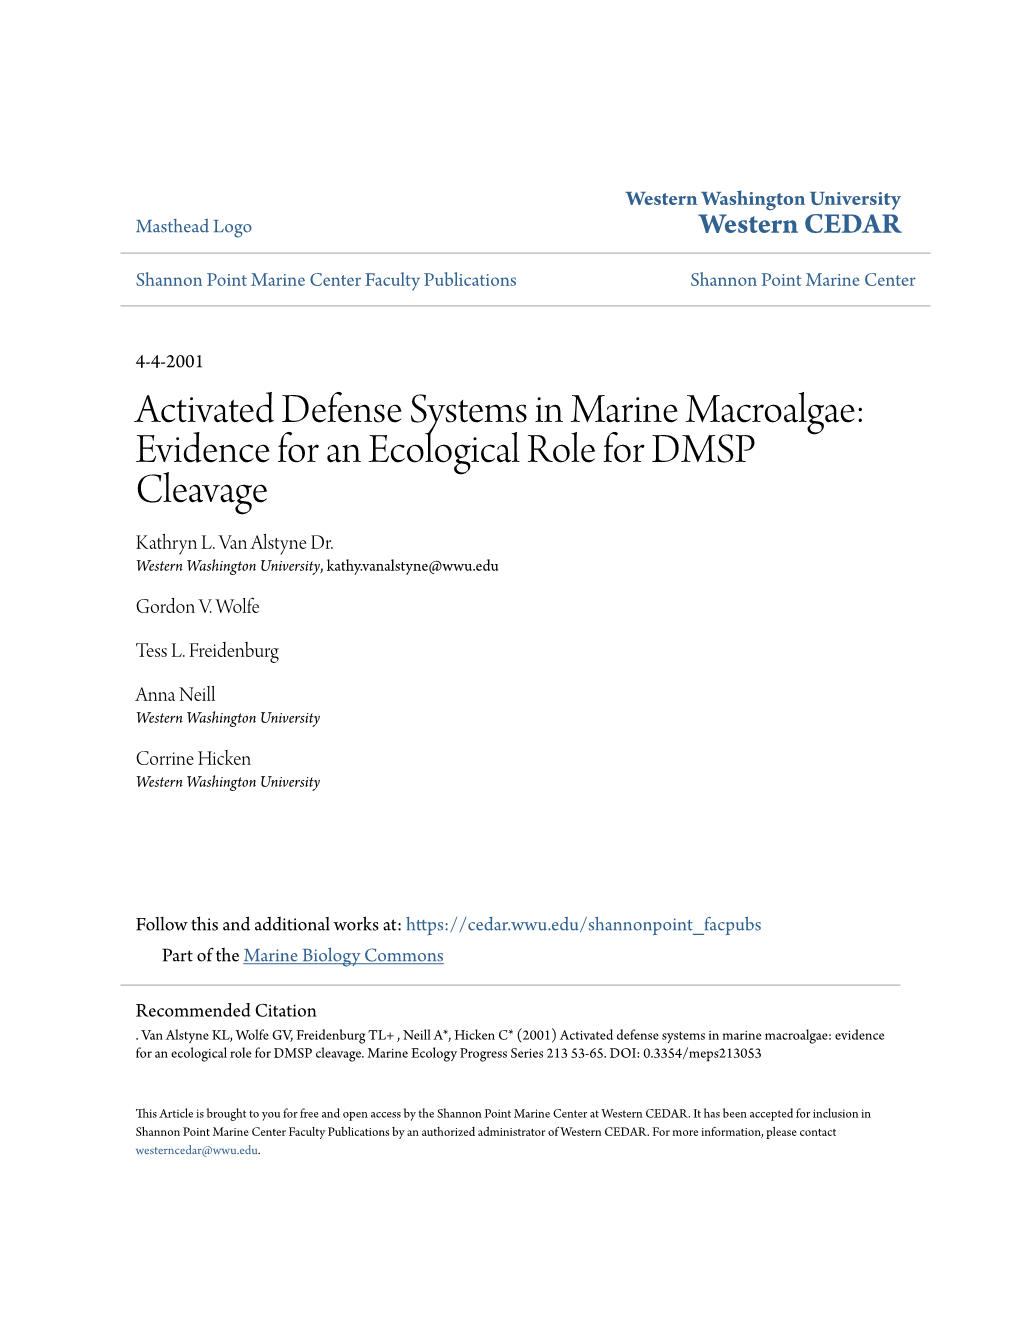 Activated Defense Systems in Marine Macroalgae: Evidence for an Ecological Role for DMSP Cleavage Kathryn L